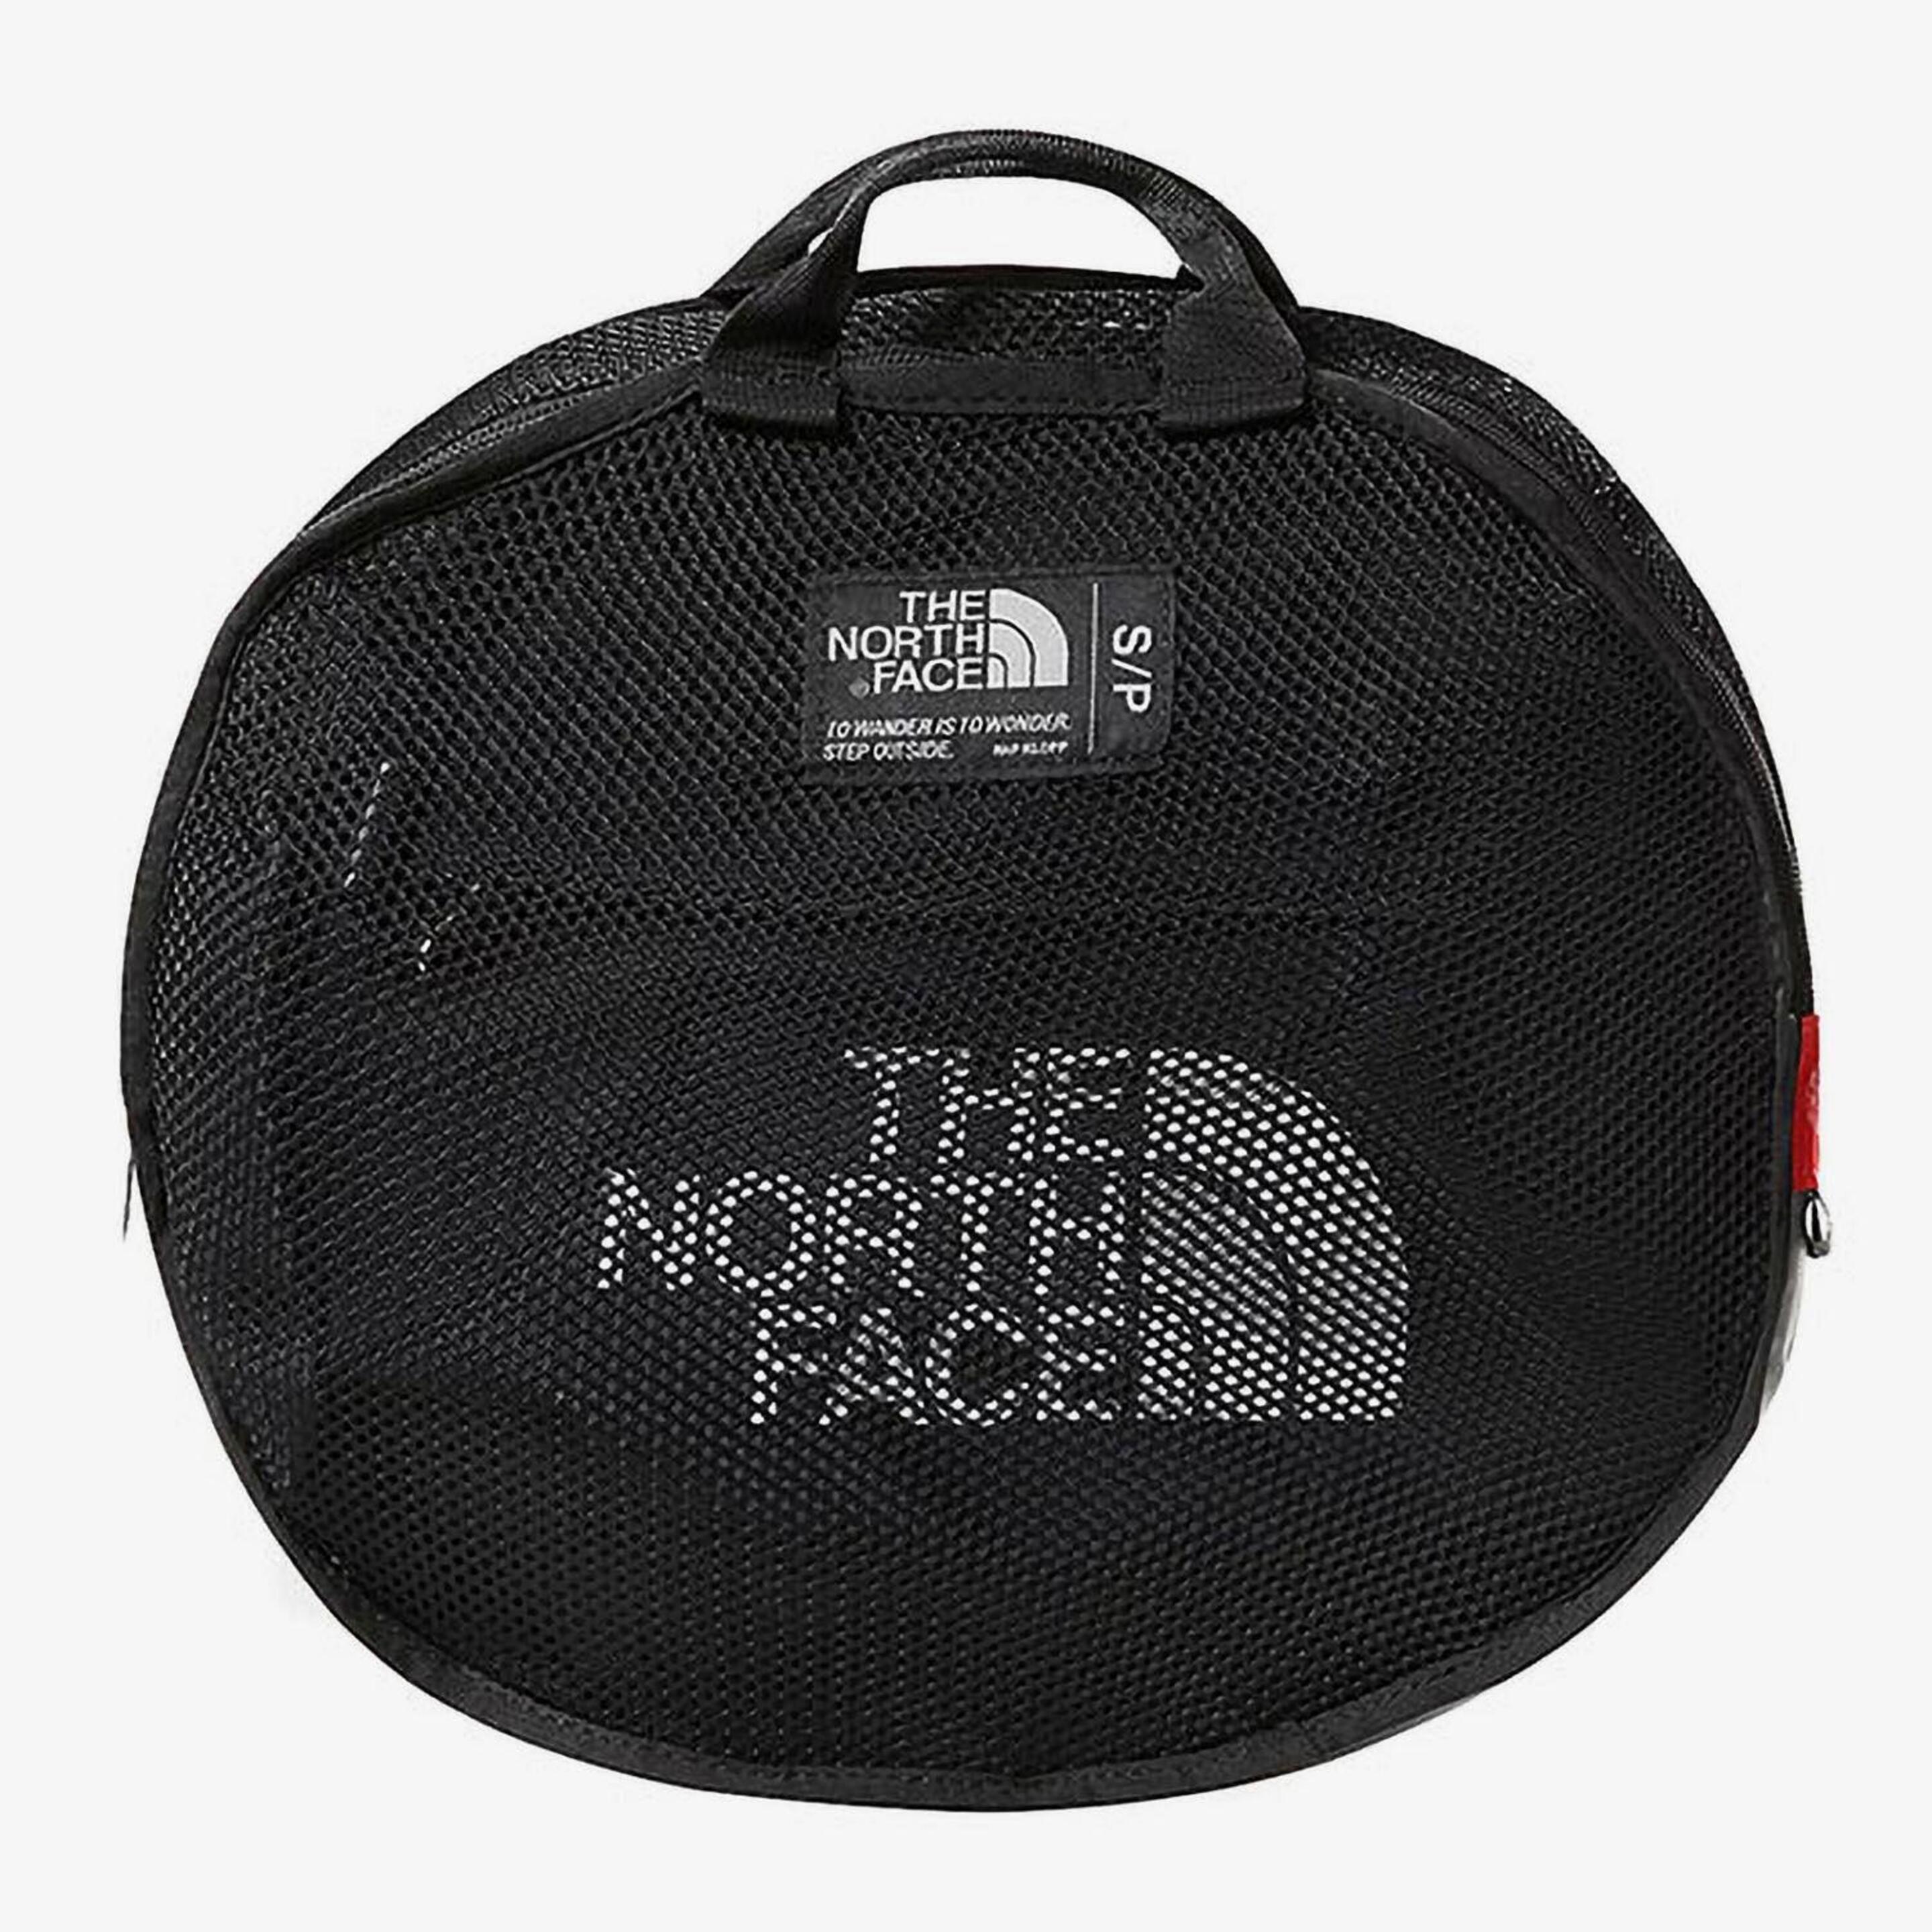 The The North Face Travel